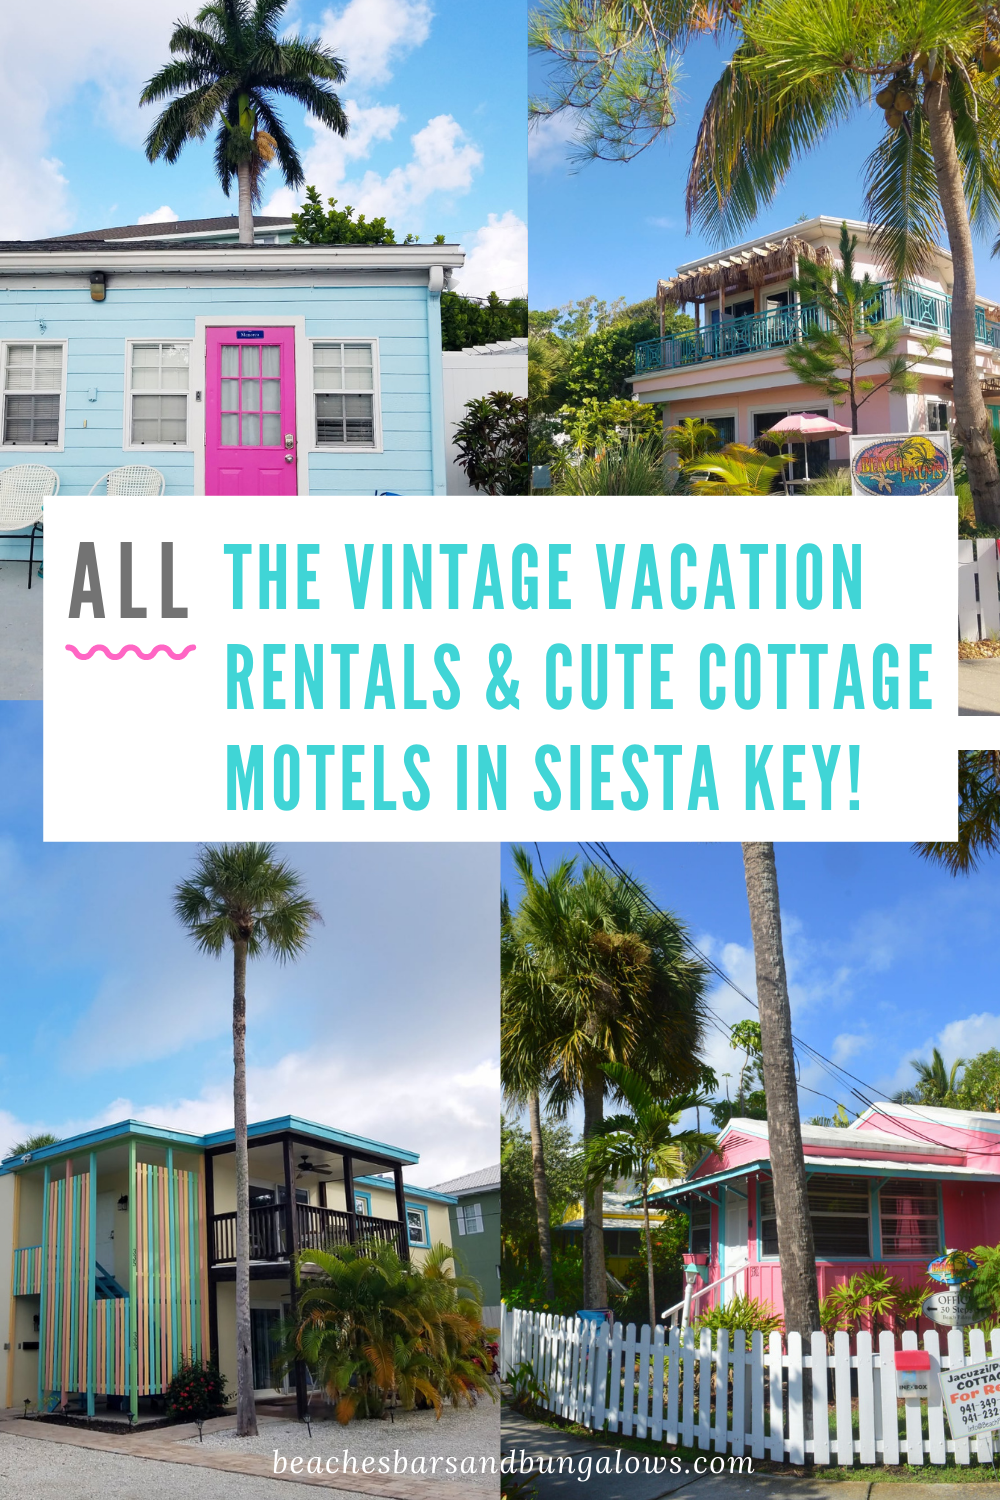 ALL the vintage vacation rentals and cute cottage motels in Siesta Key image and headline for Pinterest